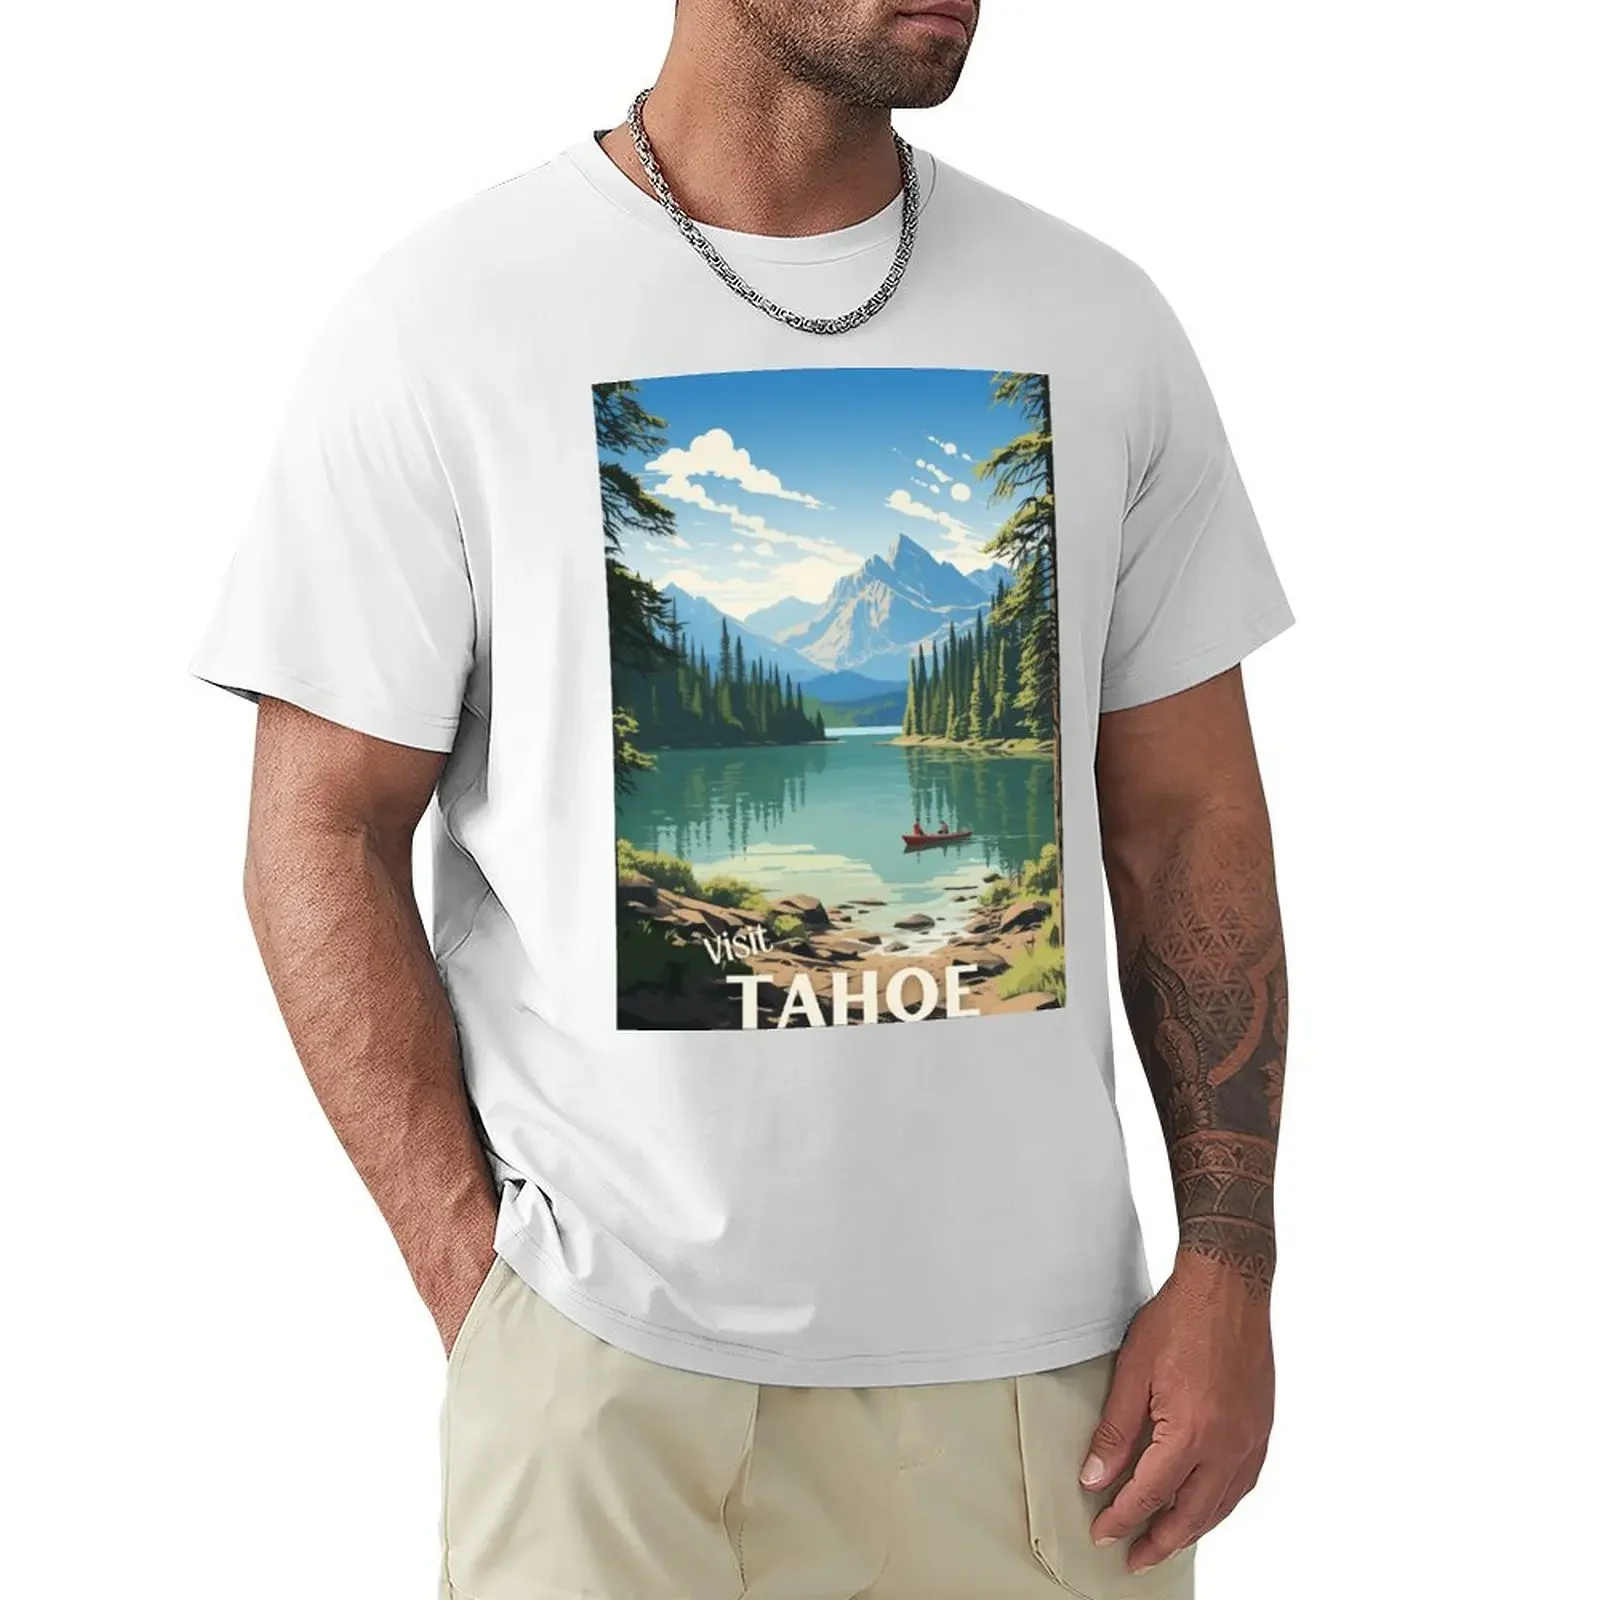 

Lake Tahoe Travel Poster T-shirt customs sports fans shirts graphic tees oversized t shirts for men